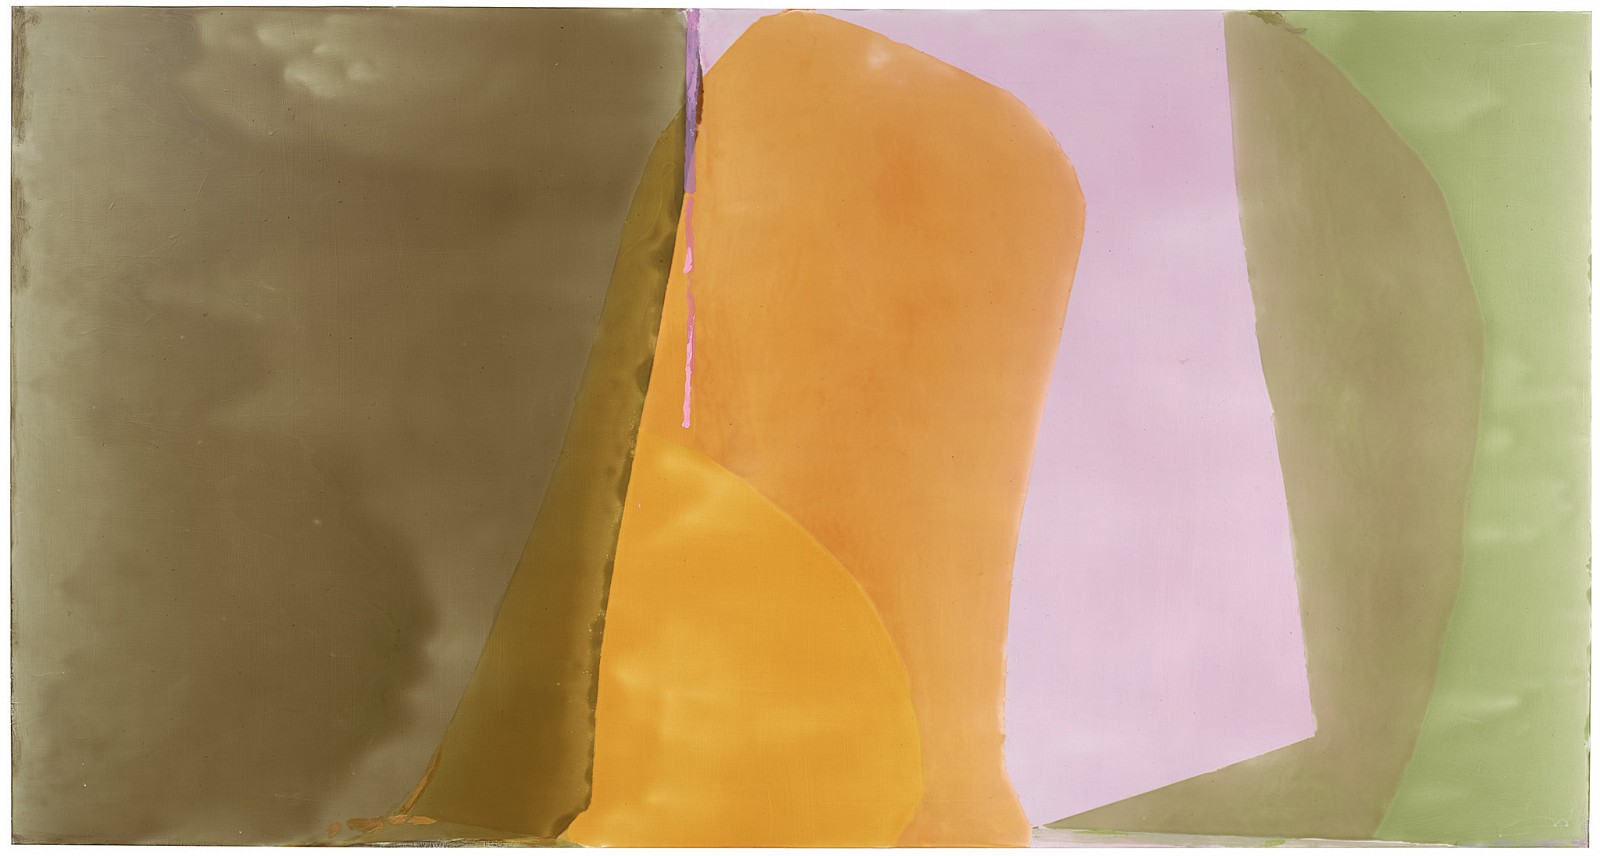 Jill Nathanson, Cantabile | SOLD, 2019
Acrylic and polymers with oil on panel, 43 x 81 in. (109.2 x 205.7 cm)
NAT-00116